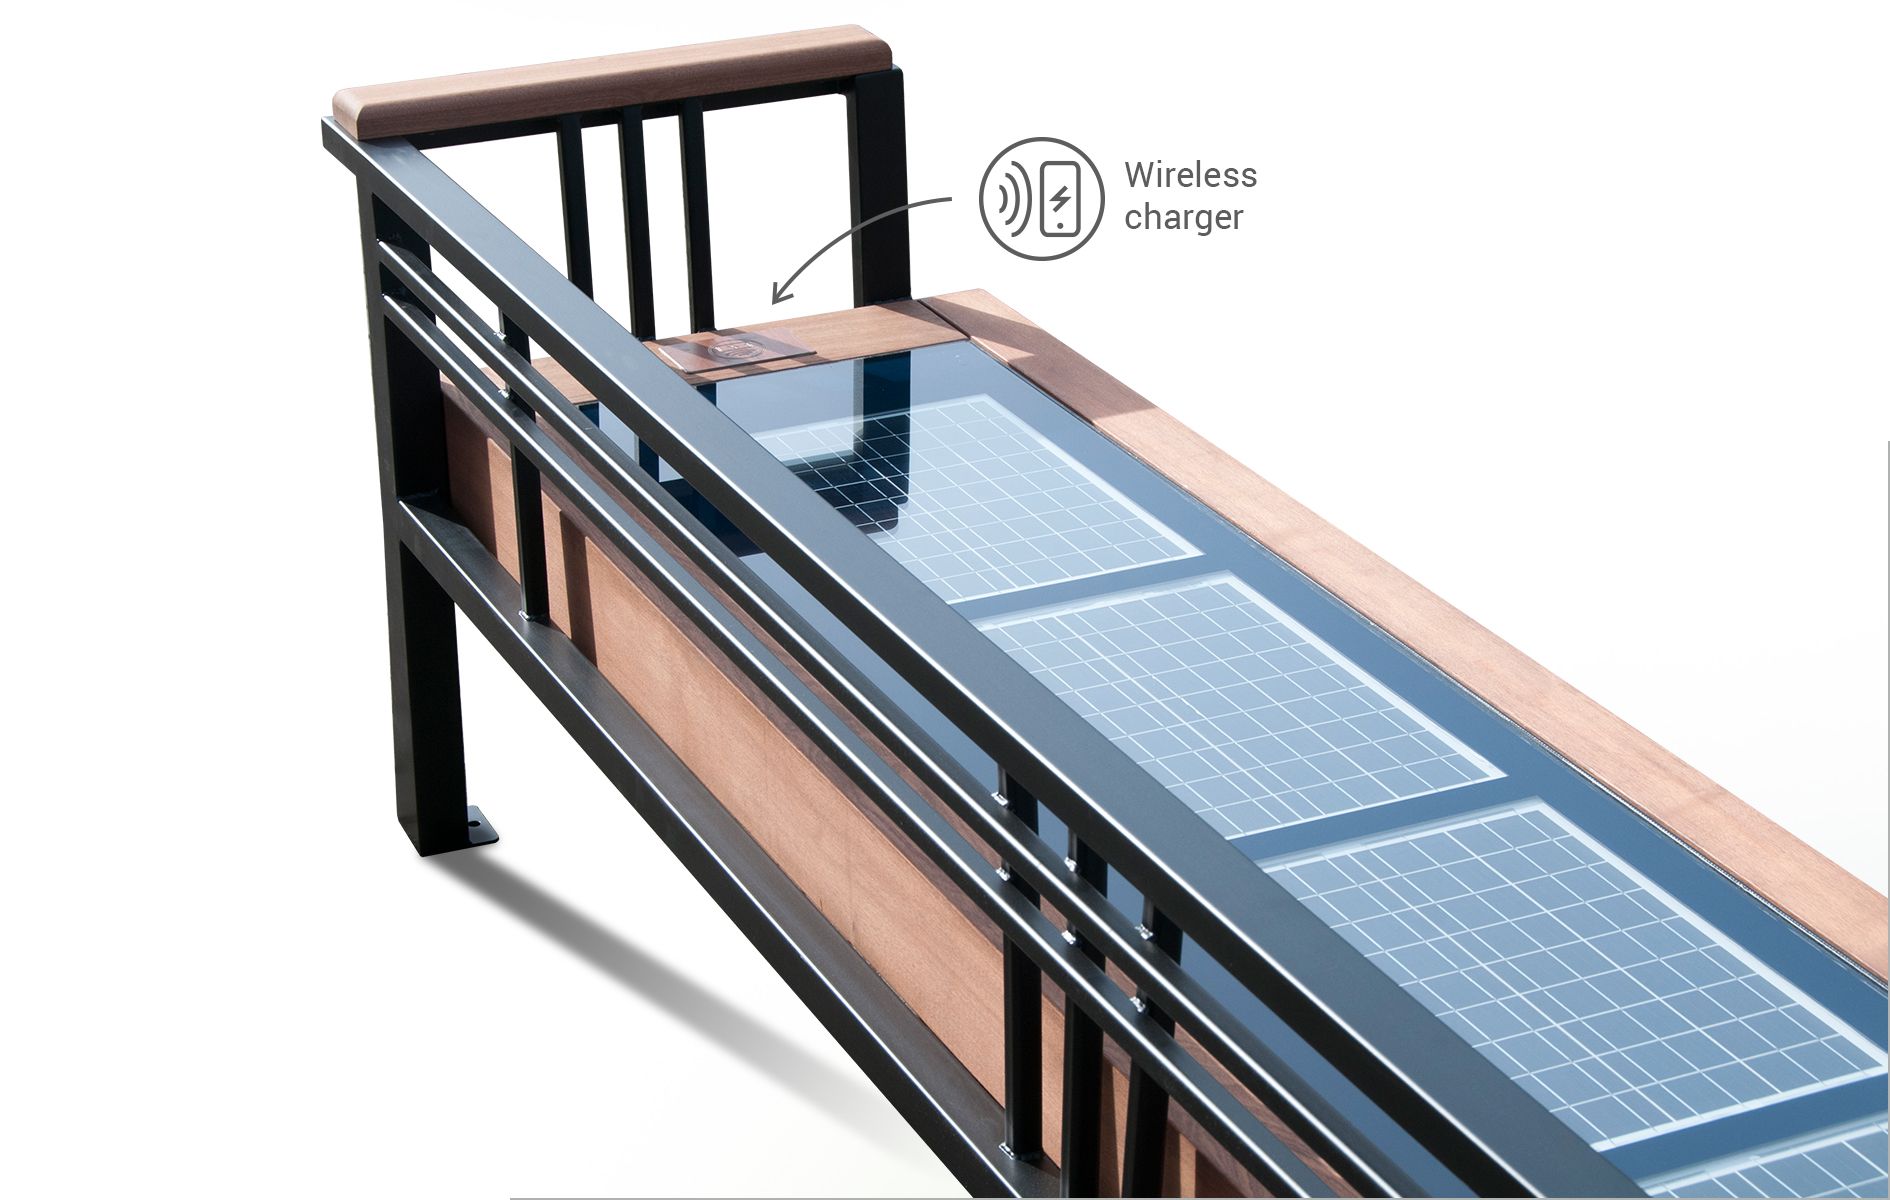 Wireless charger - extra solar bench equipment